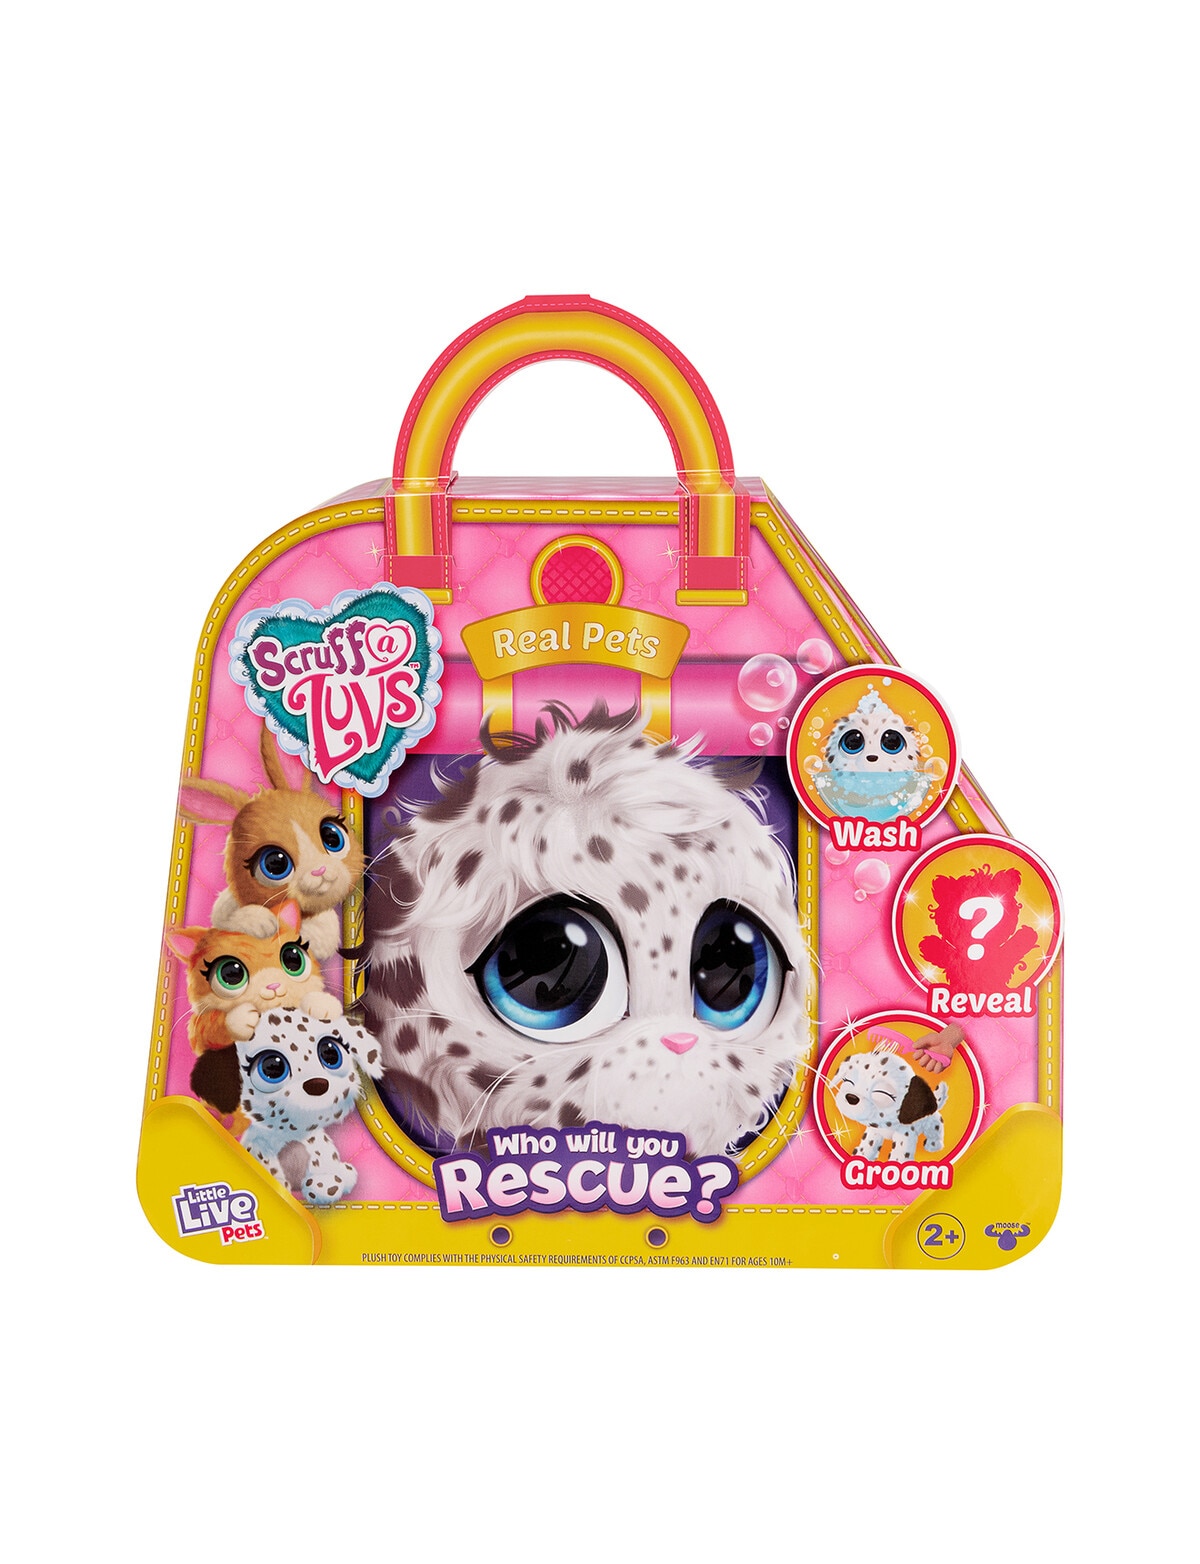 Scruff A Luvs Series 10 Real Pets, Assorted - Action Figures